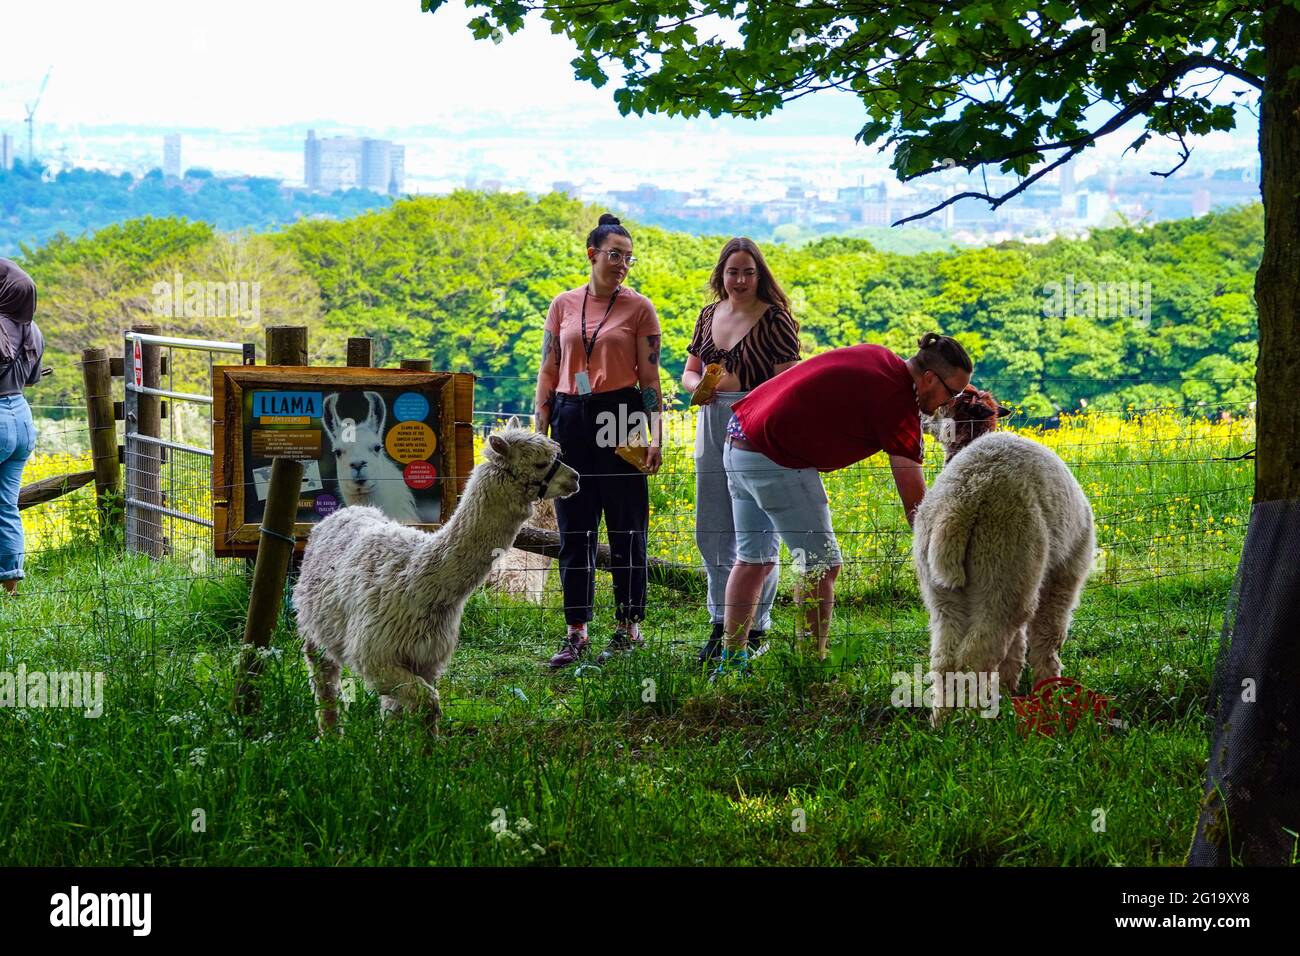 Summer at Alpaca farm in Sheffield, South Yorkshire, North of England, UK Stock Photo